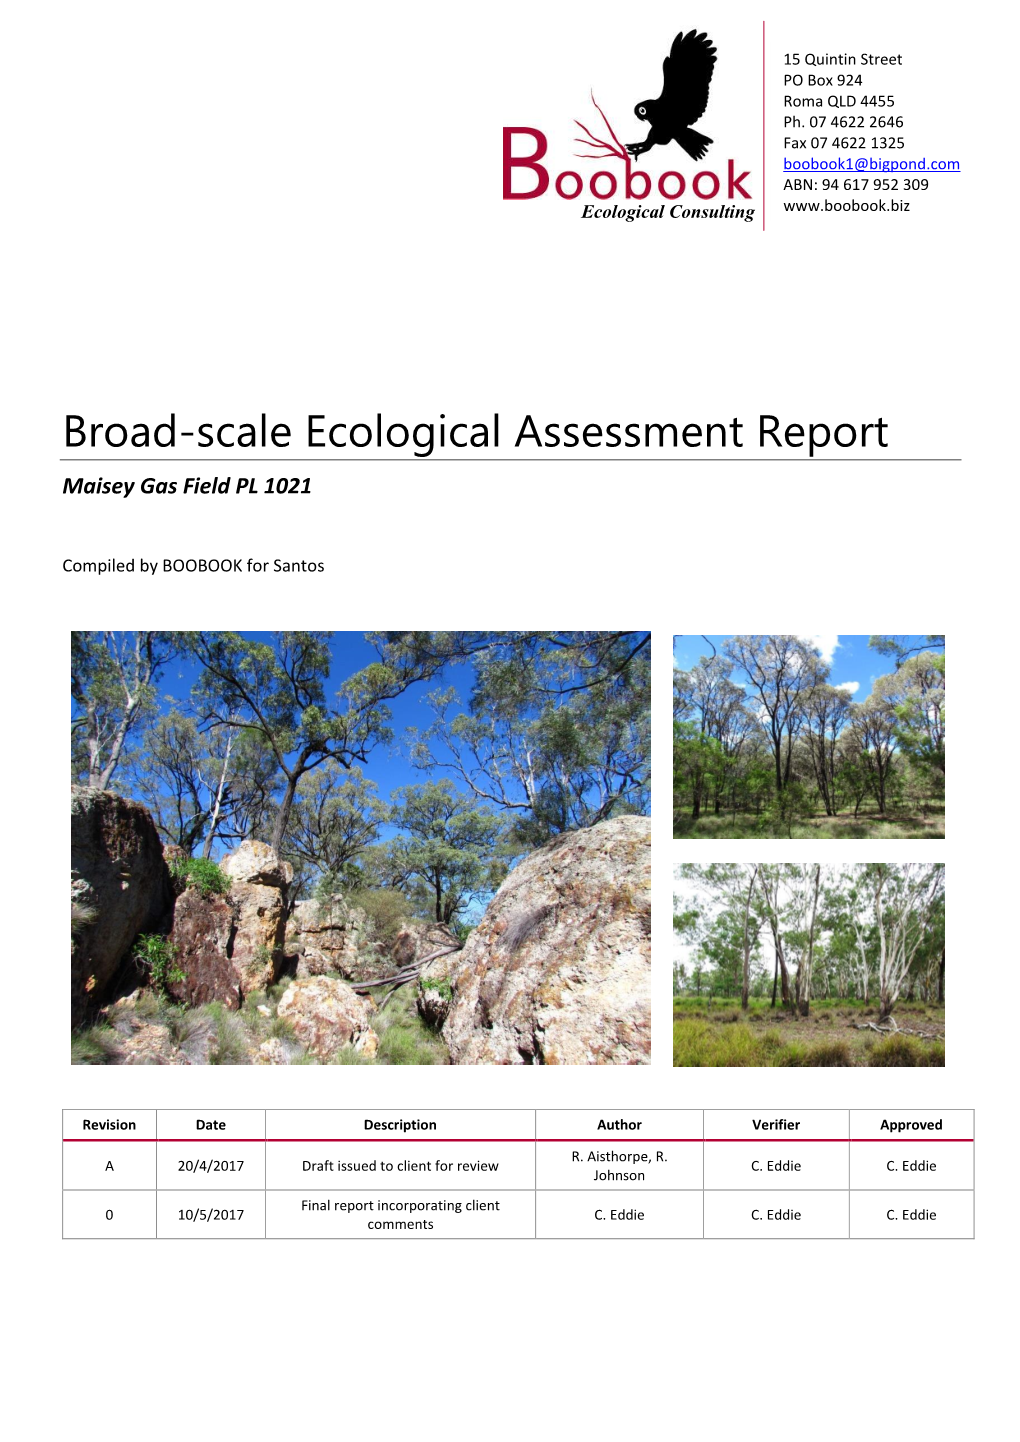 Broad-Scale Ecological Assessment Report Maisey Gas Field PL 1021